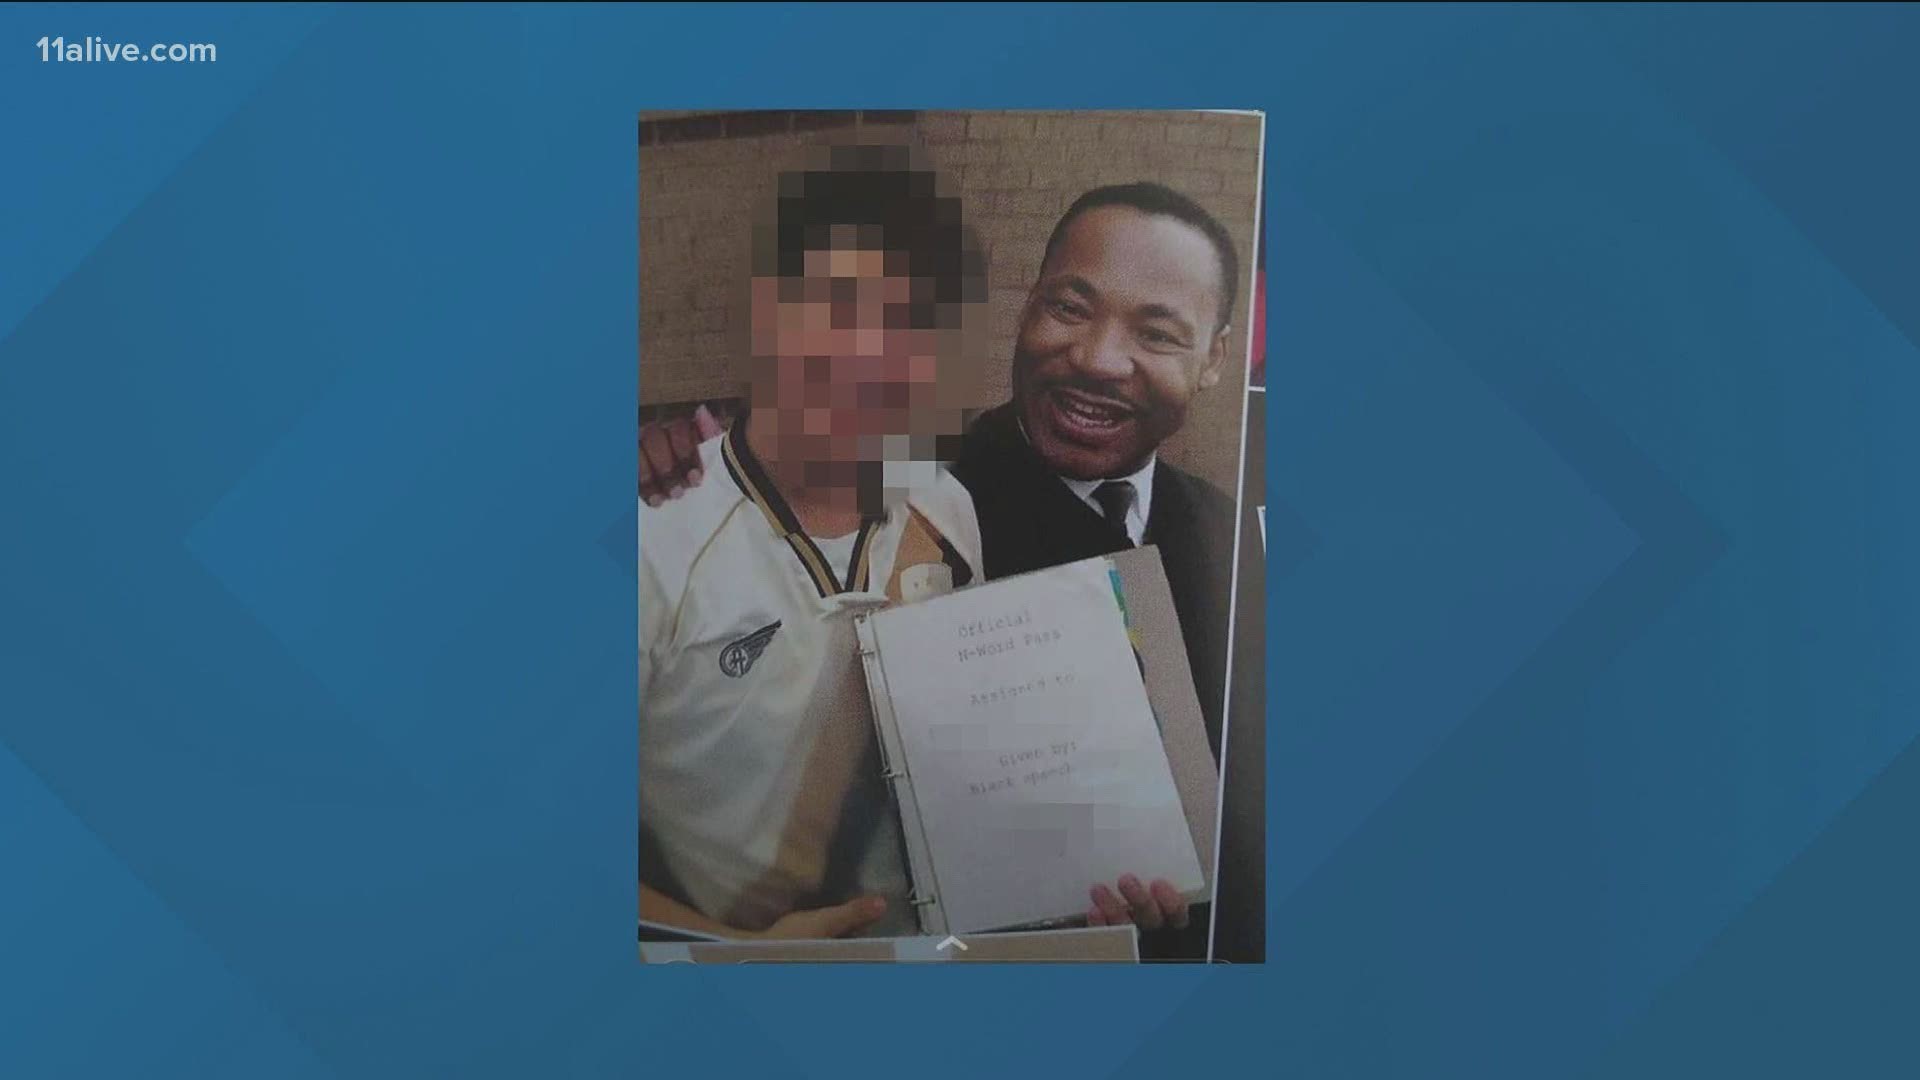 The photograph shows a student posing with Dr. Martin Luther King Jr., while holding a notebook with a document that reads "Official N-word Pass."